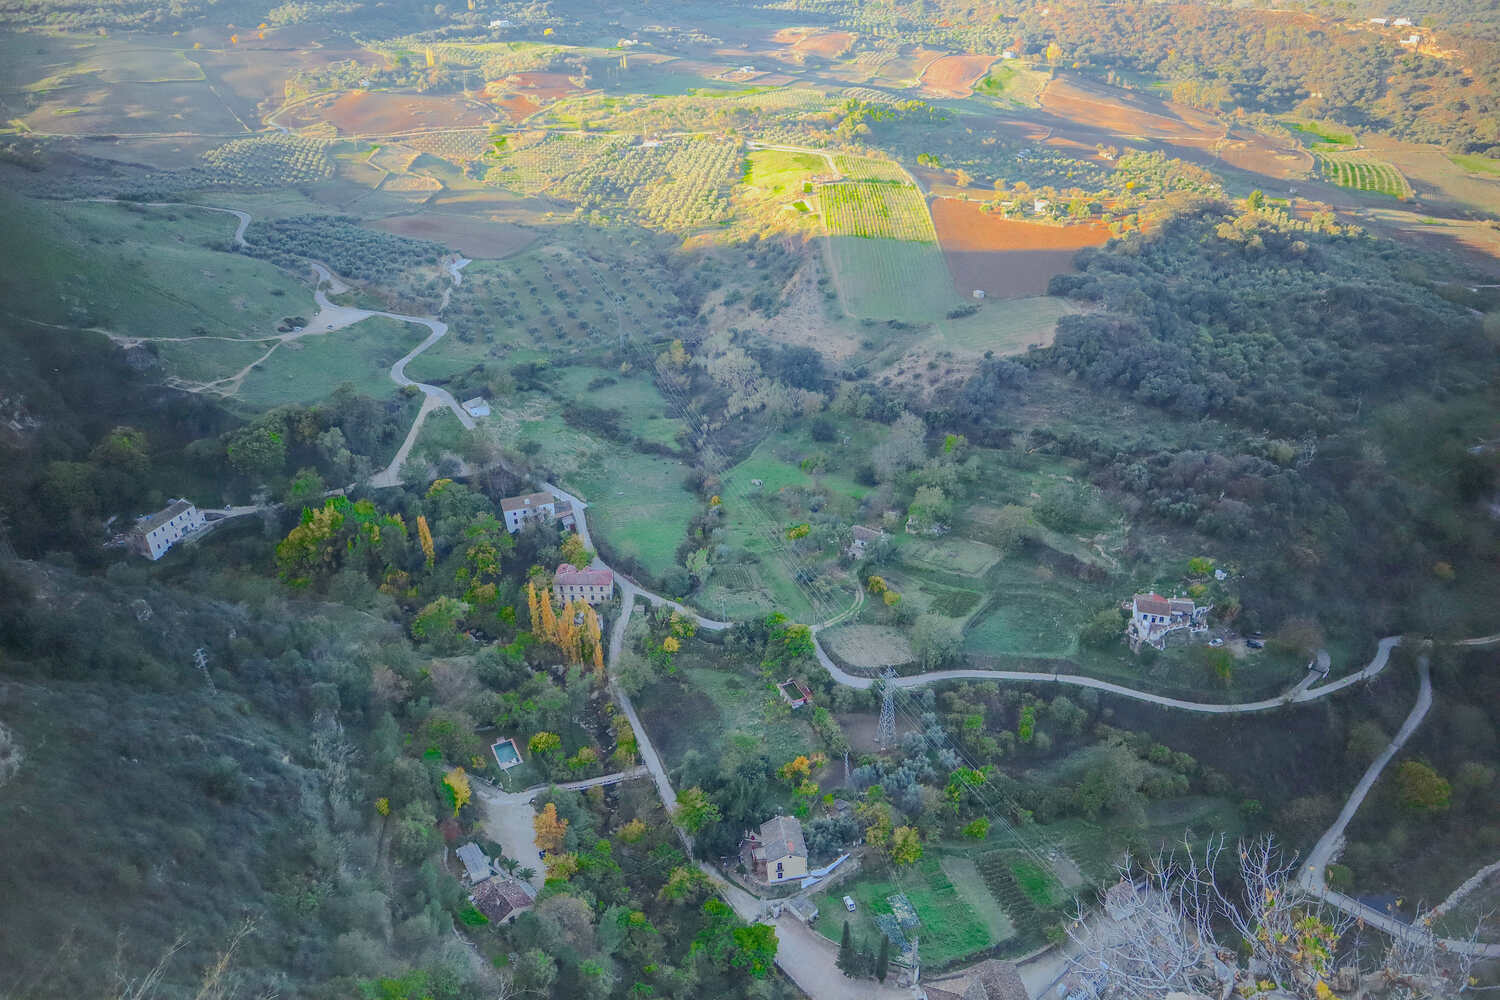 Aerial shot of a verdant valley with patchwork fields and meandering river, surrounded by gentle hills